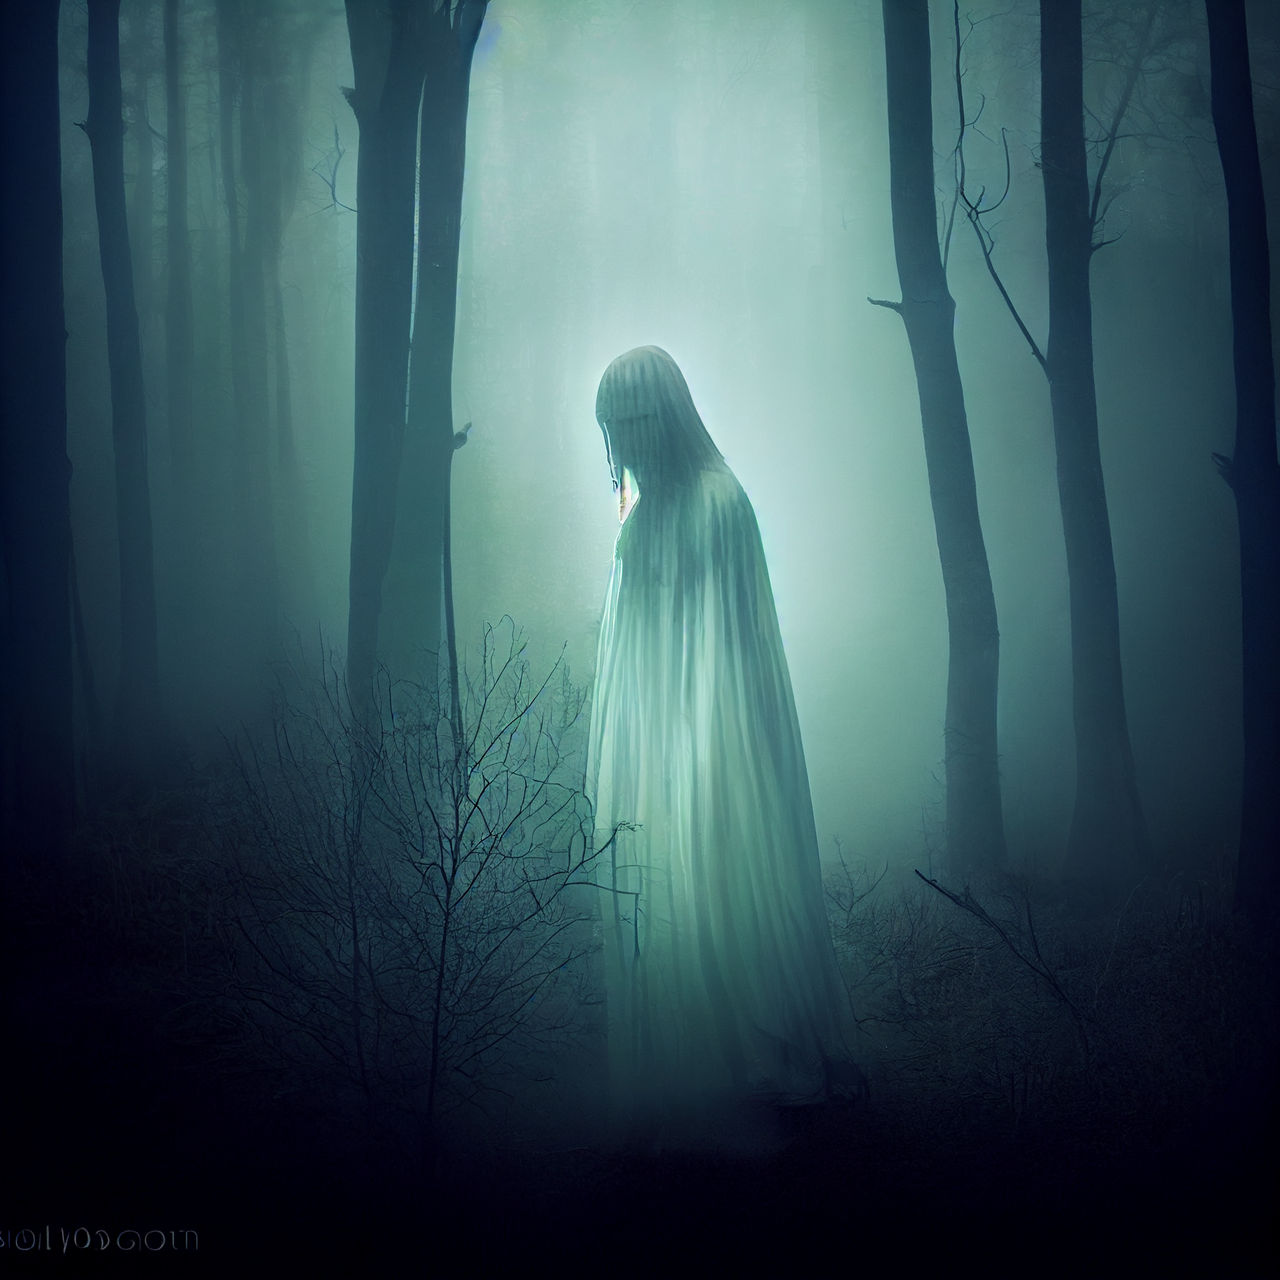 ghost in the forest by Moribato on DeviantArt